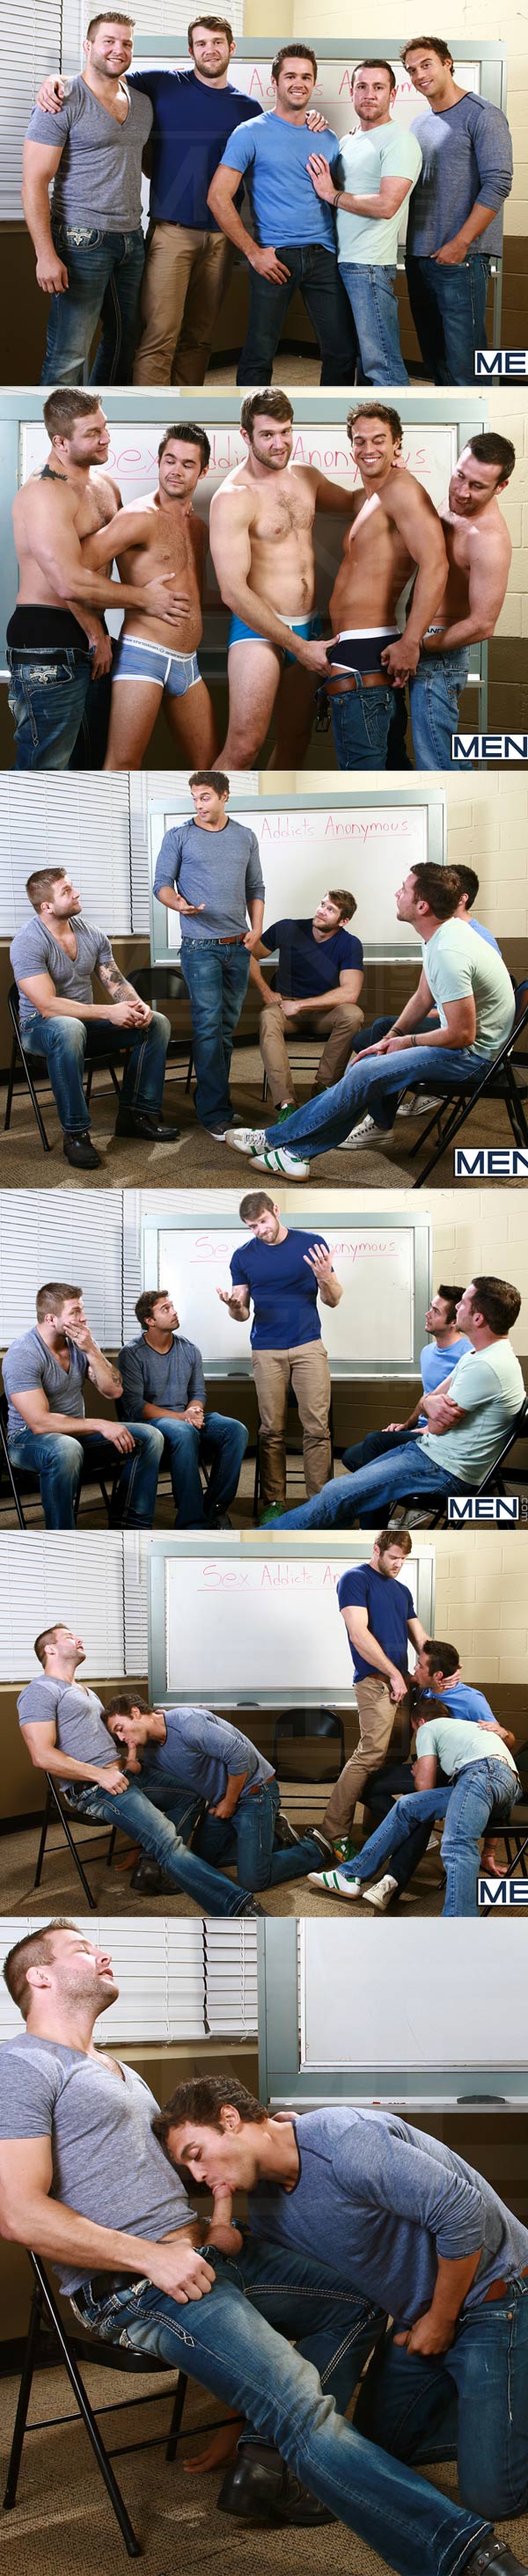 Sex Addicks Anonymous (Trevor Knight, Colby Keller, Colby Jansen, Rocco Reed & Mike De Marko) at JizzOrgy